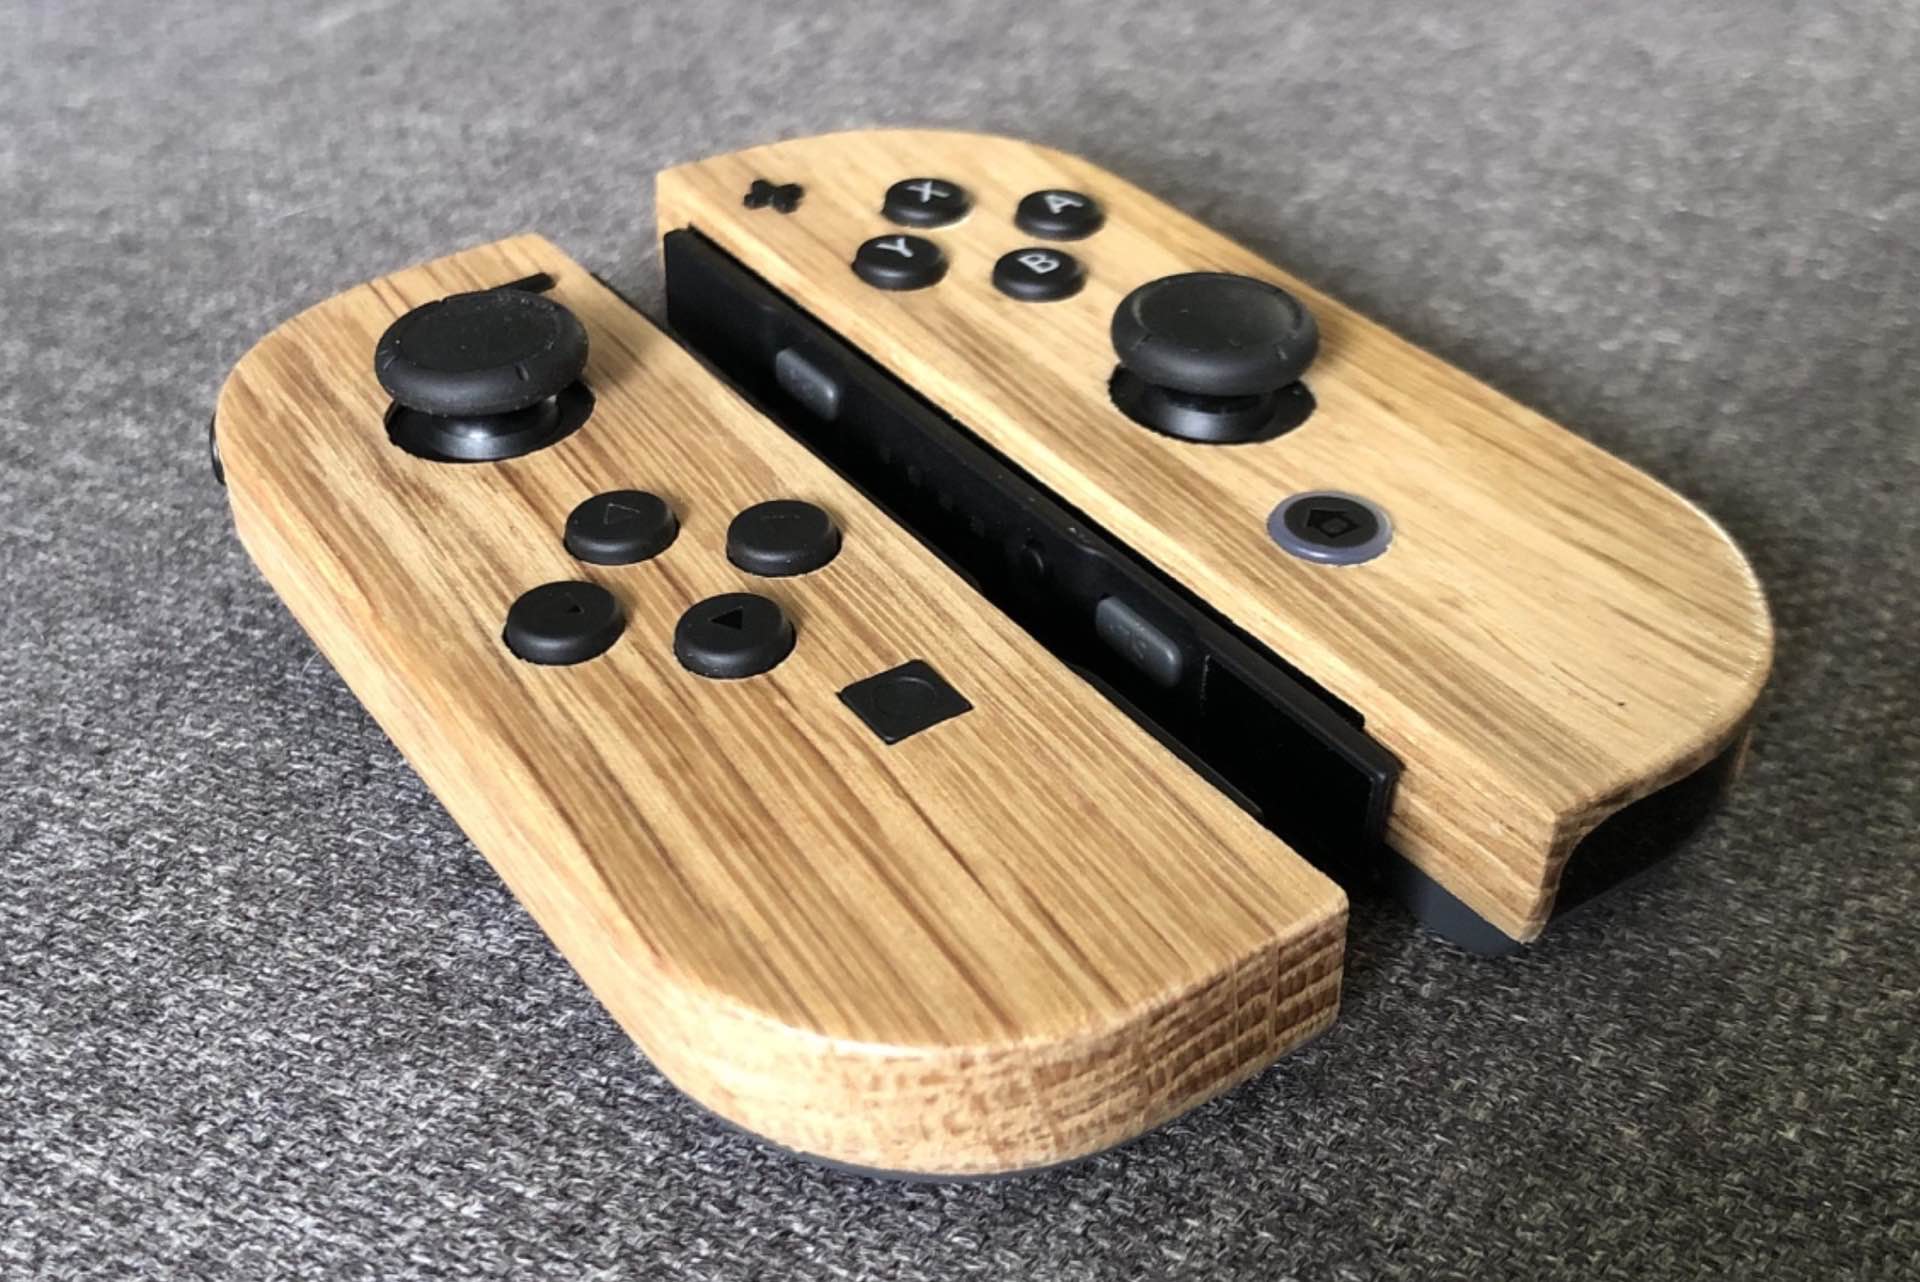 Handmade Wooden Housings for Nintendo Switch Joy-Cons by Aldered